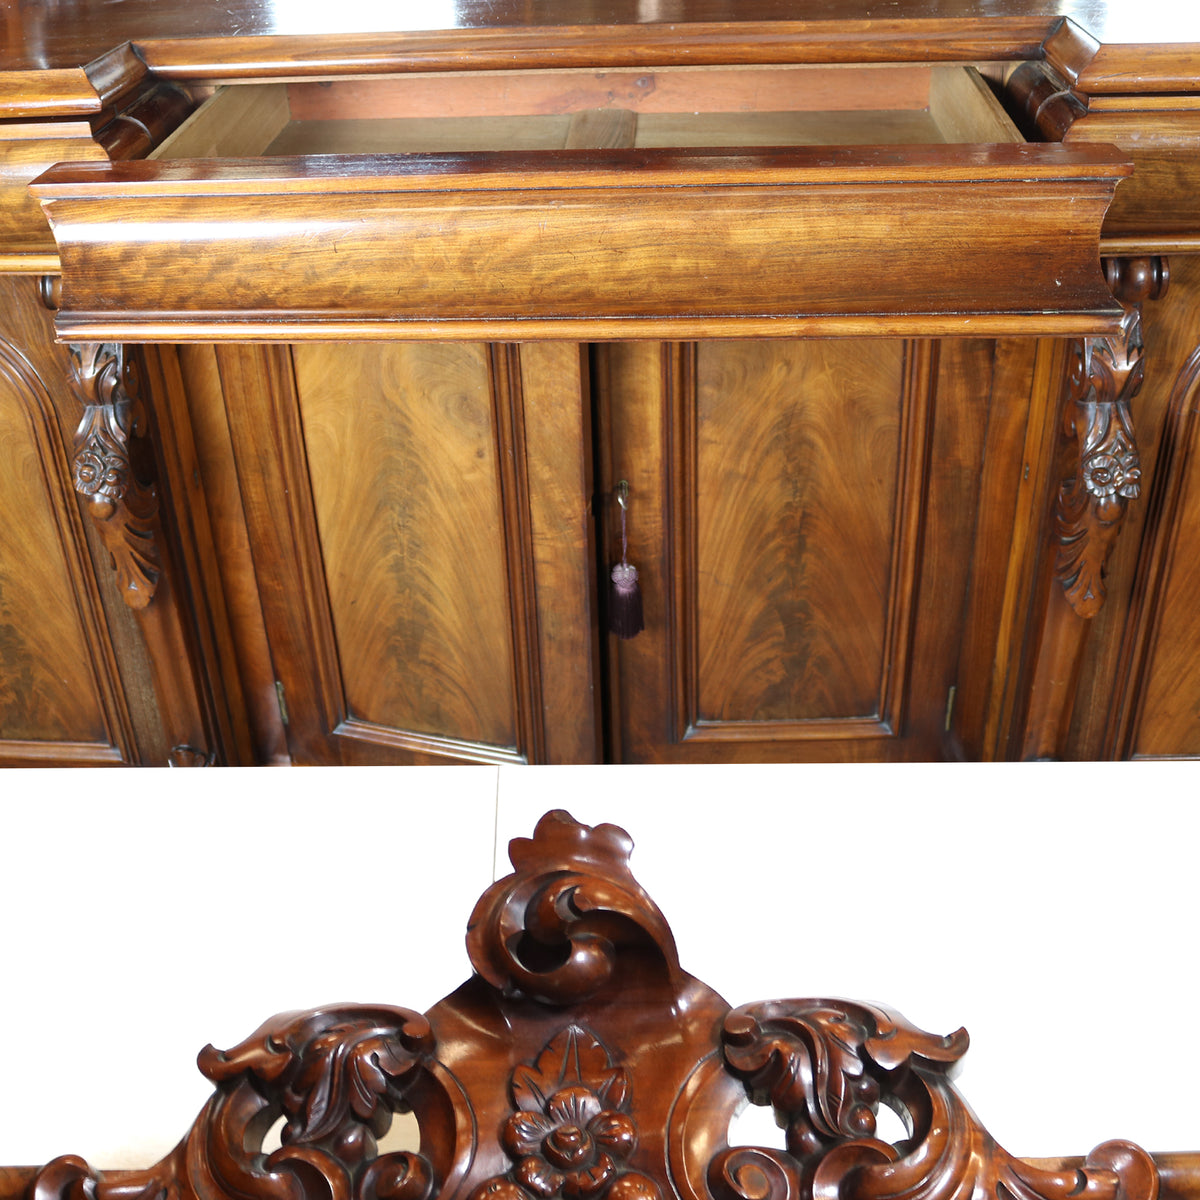 Antique Ornate Carved Mahogany Sideboard with Mirror and Secret Drawers | The Architectural Forum